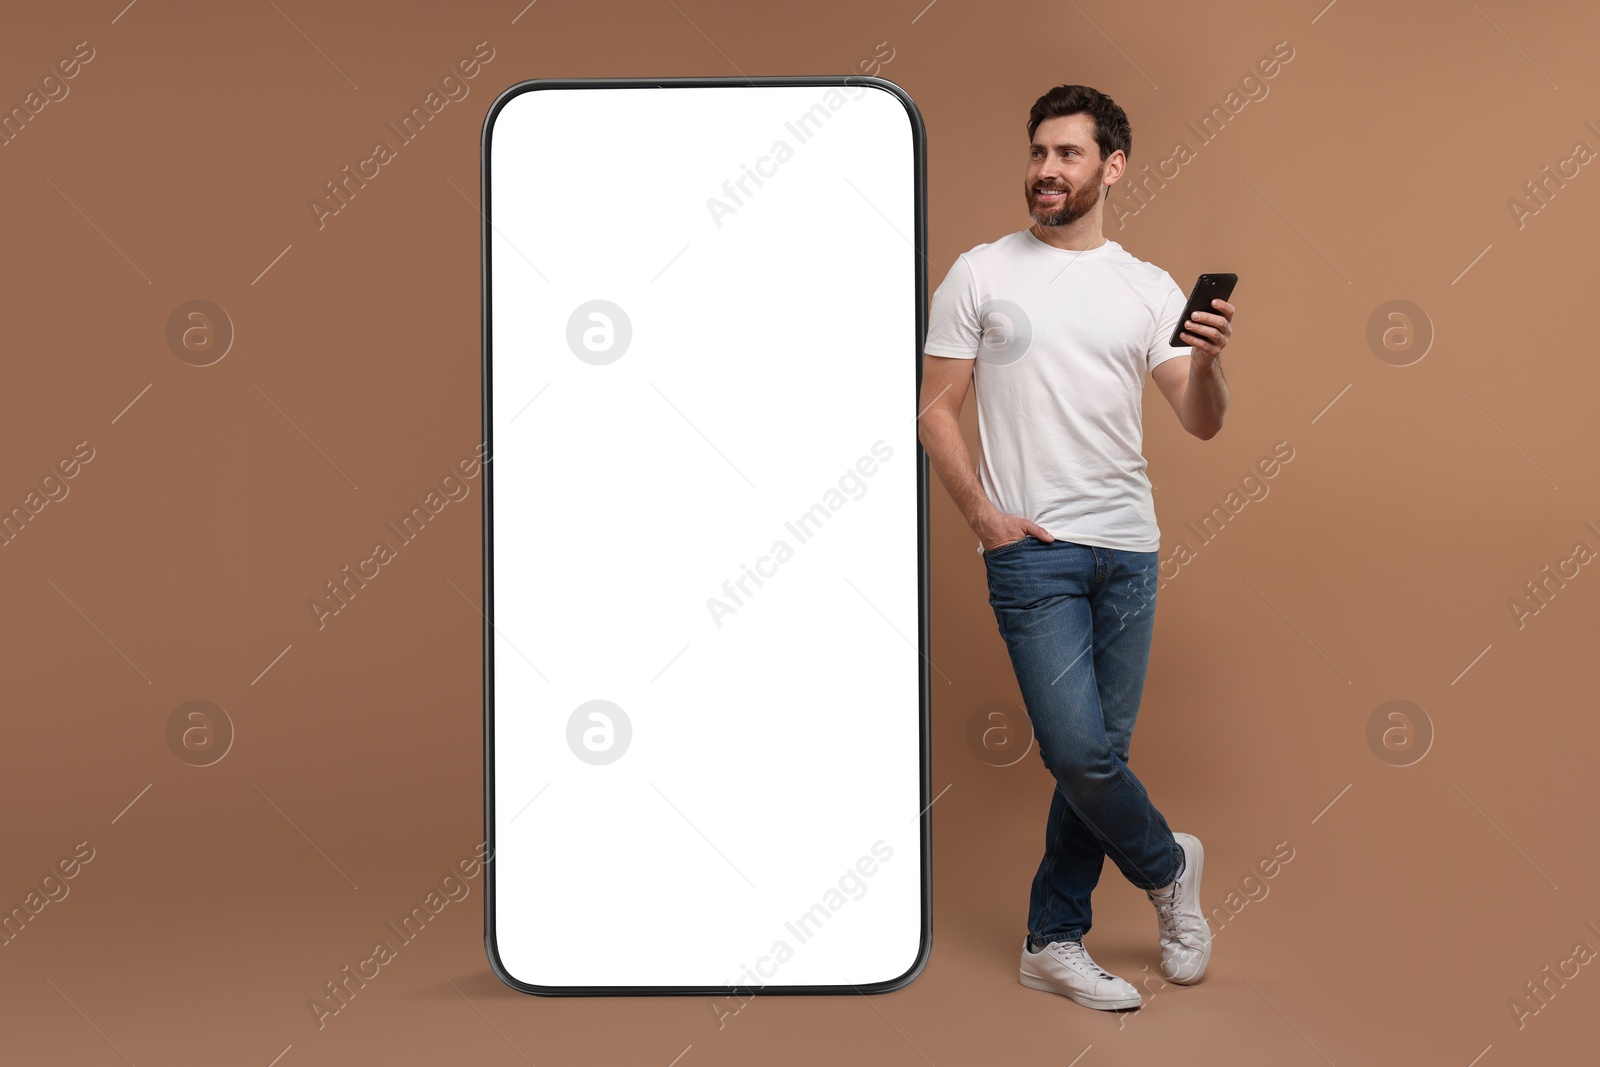 Image of Man with mobile phone standing near huge device with empty screen on dark beige background. Mockup for design